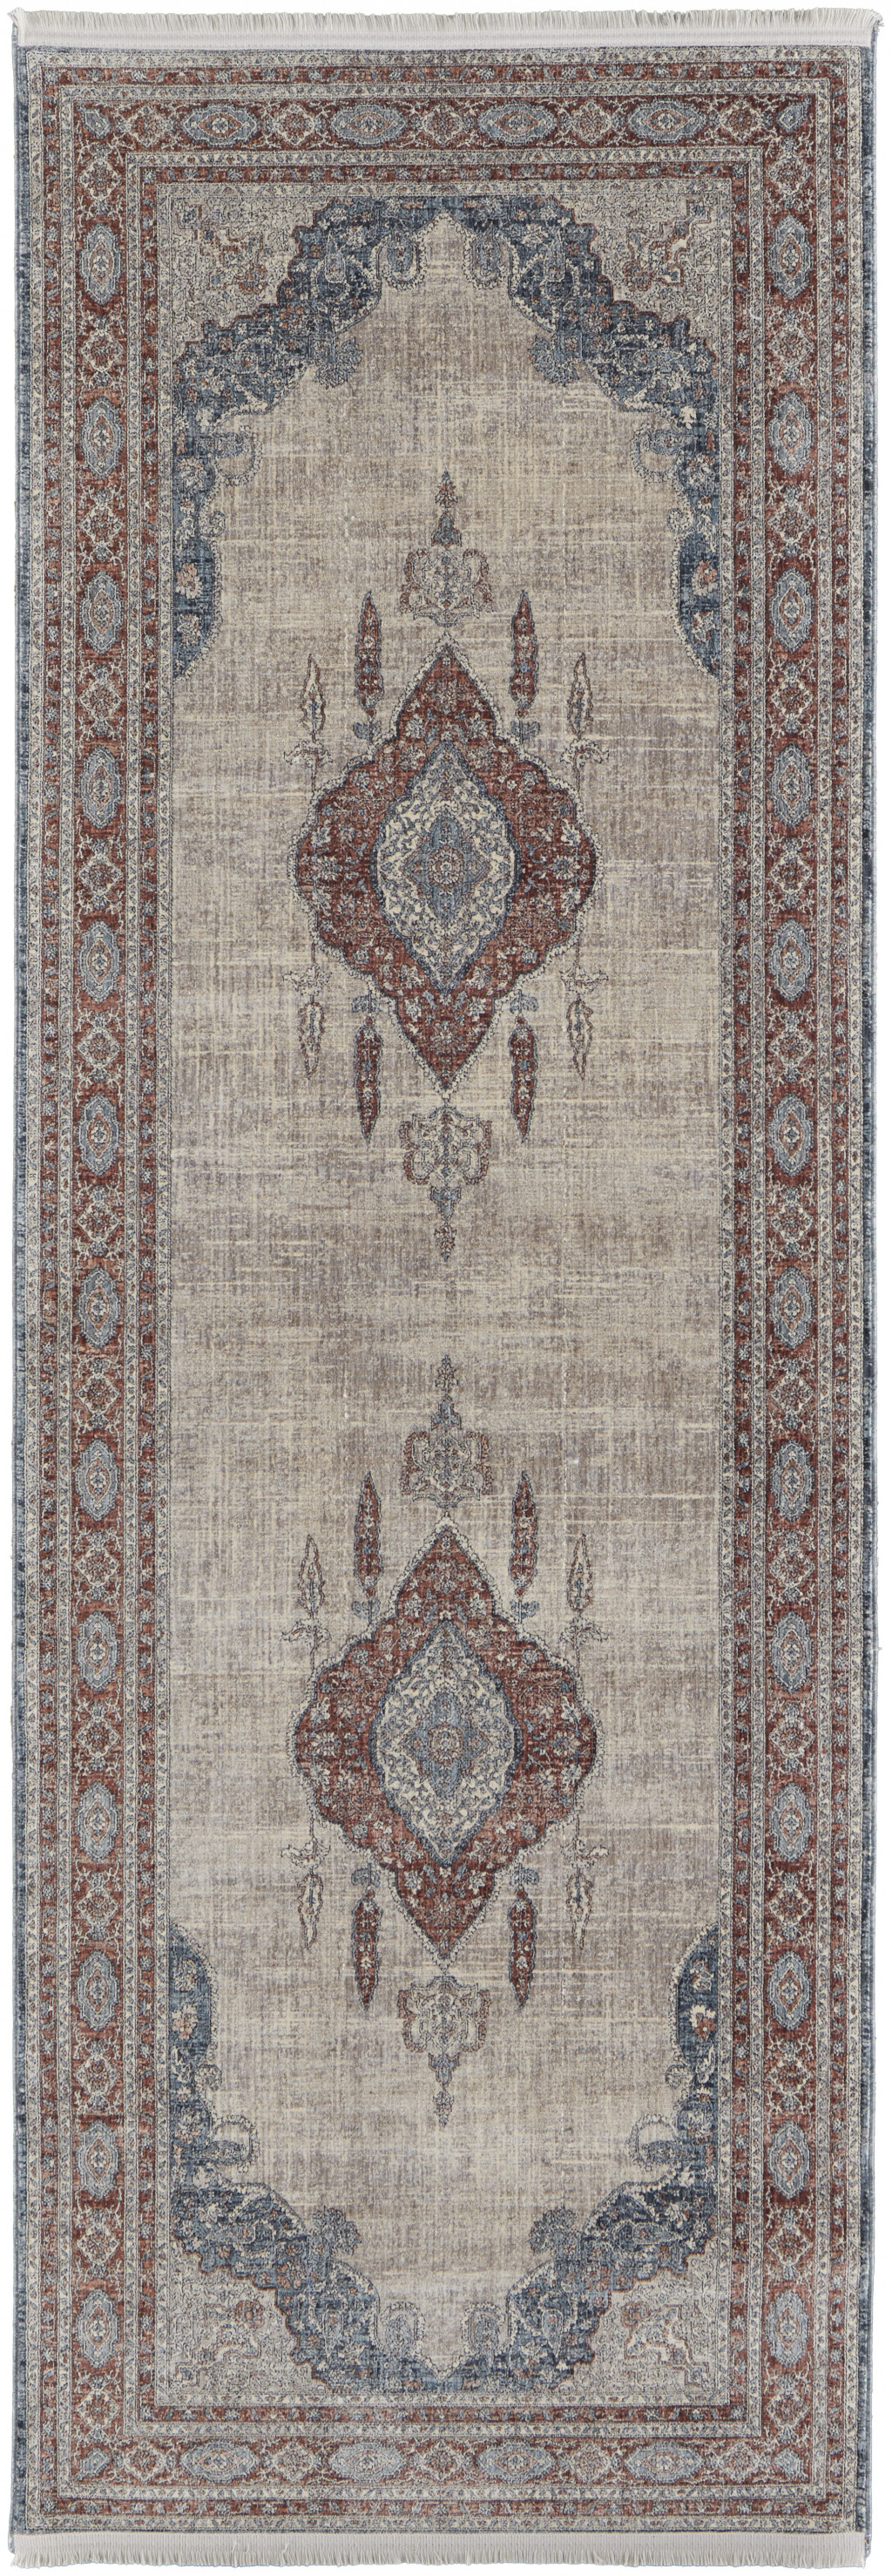 12' Gray Red And Blue Floral Power Loom Runner Rug-514462-1